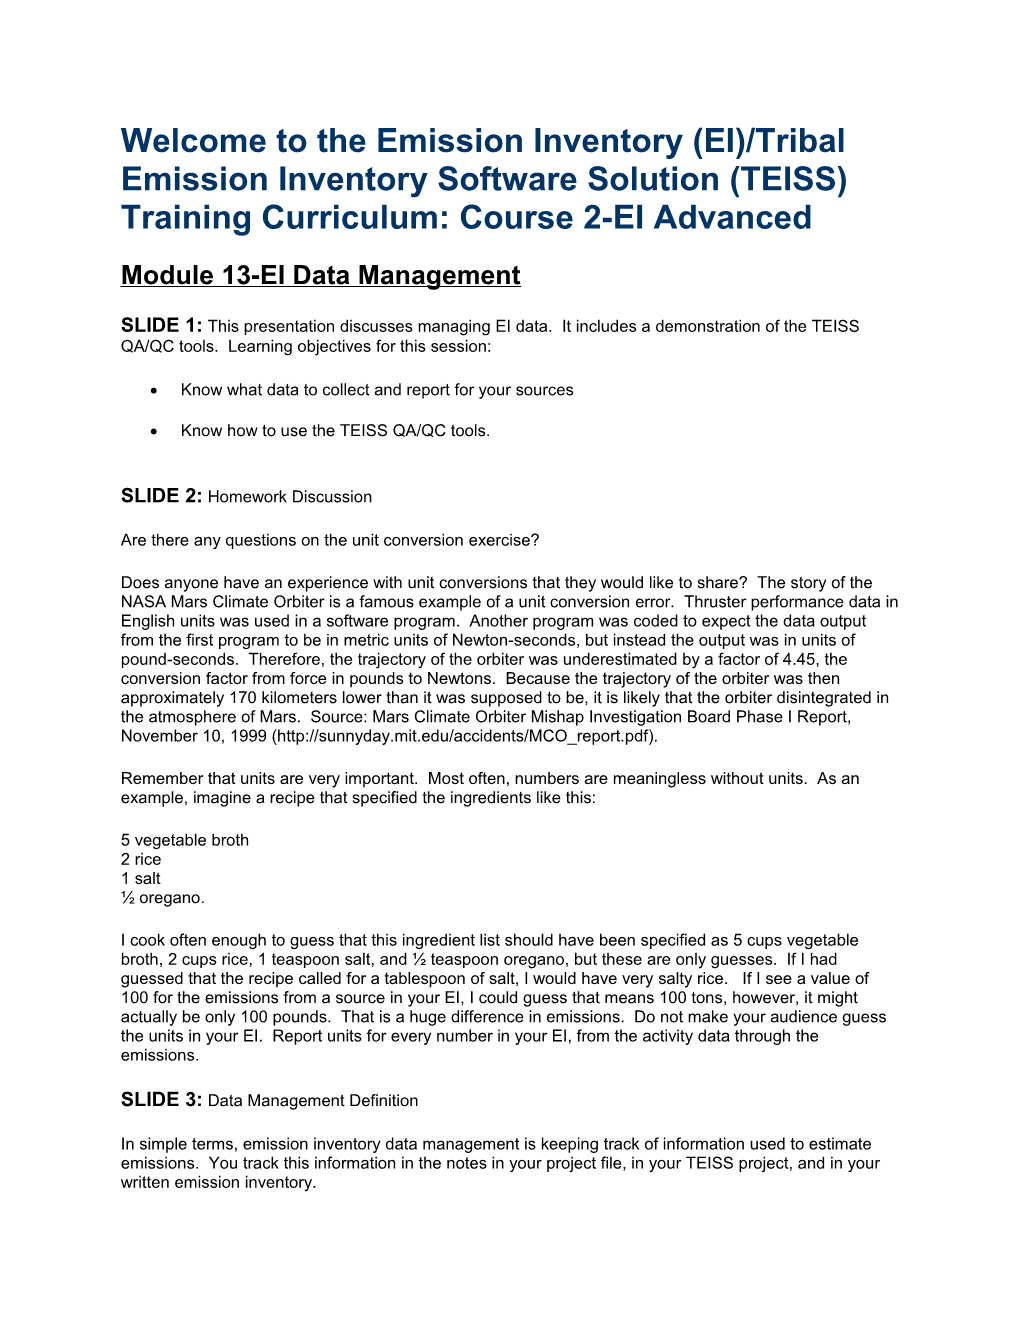 Welcome to the Emission Inventory (EI)/Tribal Emission Inventory Software Solution (TEISS) s2